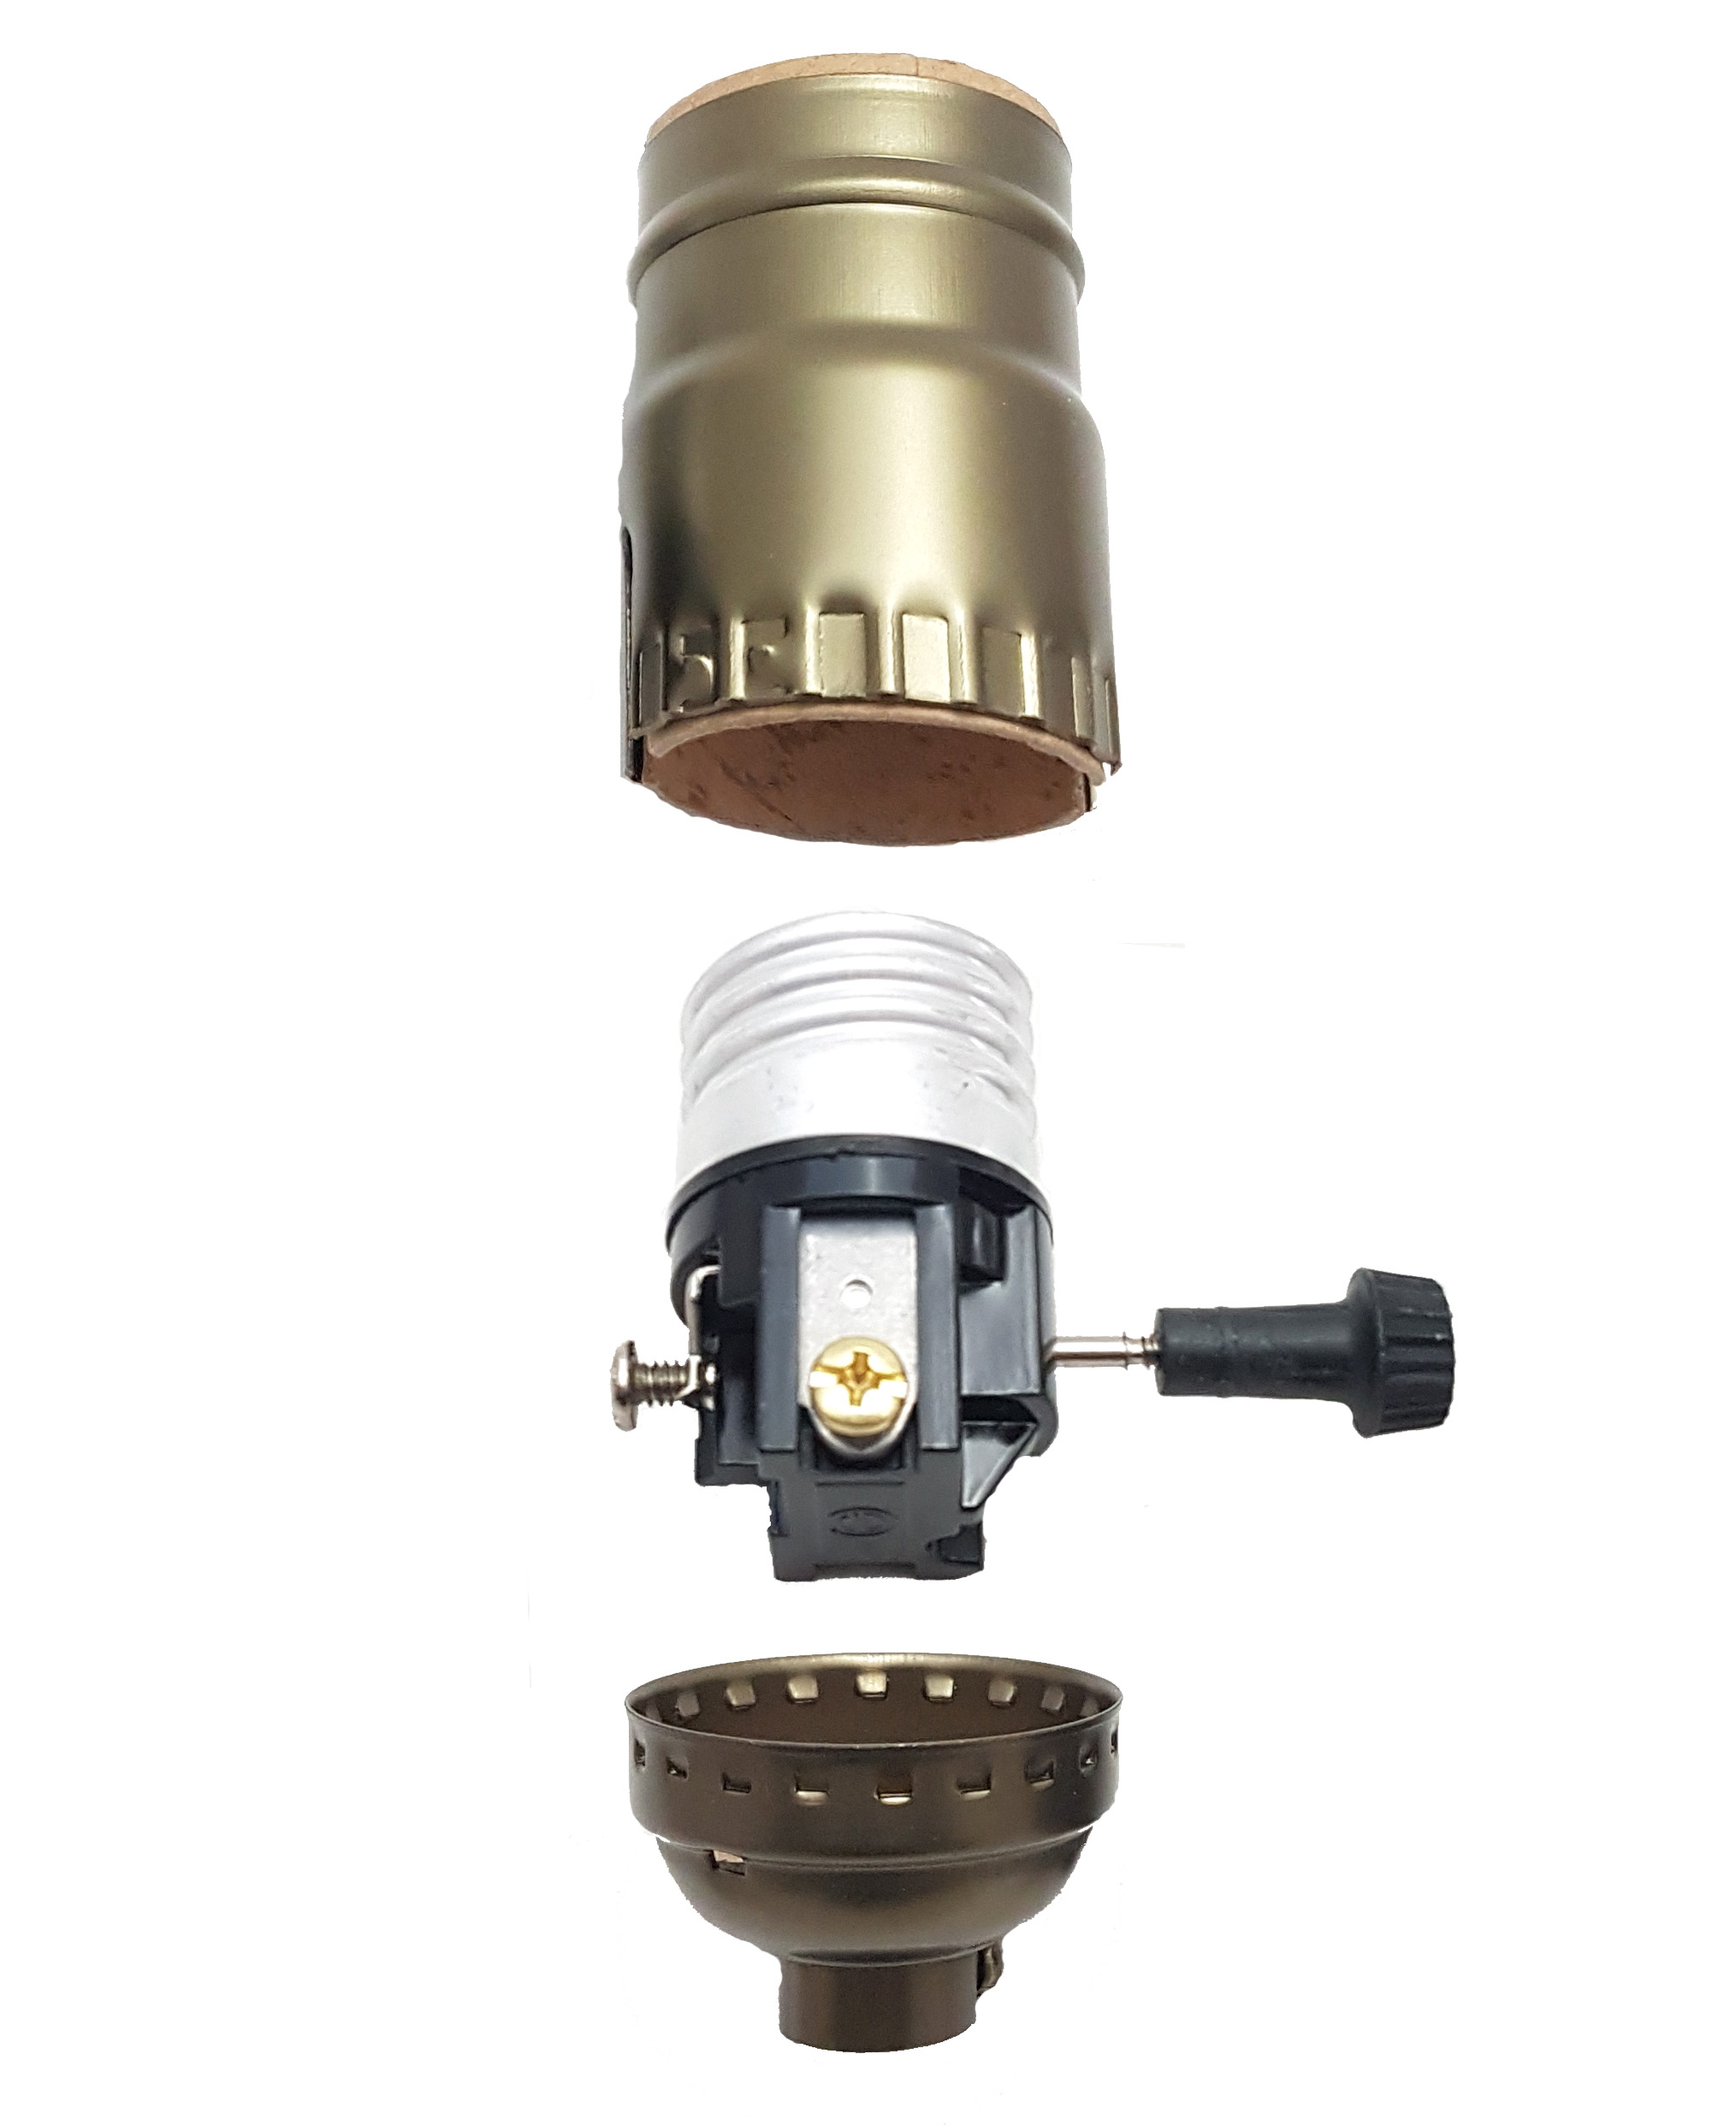 B&P Lamp® Antique Brass Finish Table Lamp Wiring Kit with a 7 Inch Harp and 3-Way Socket - image 3 of 5